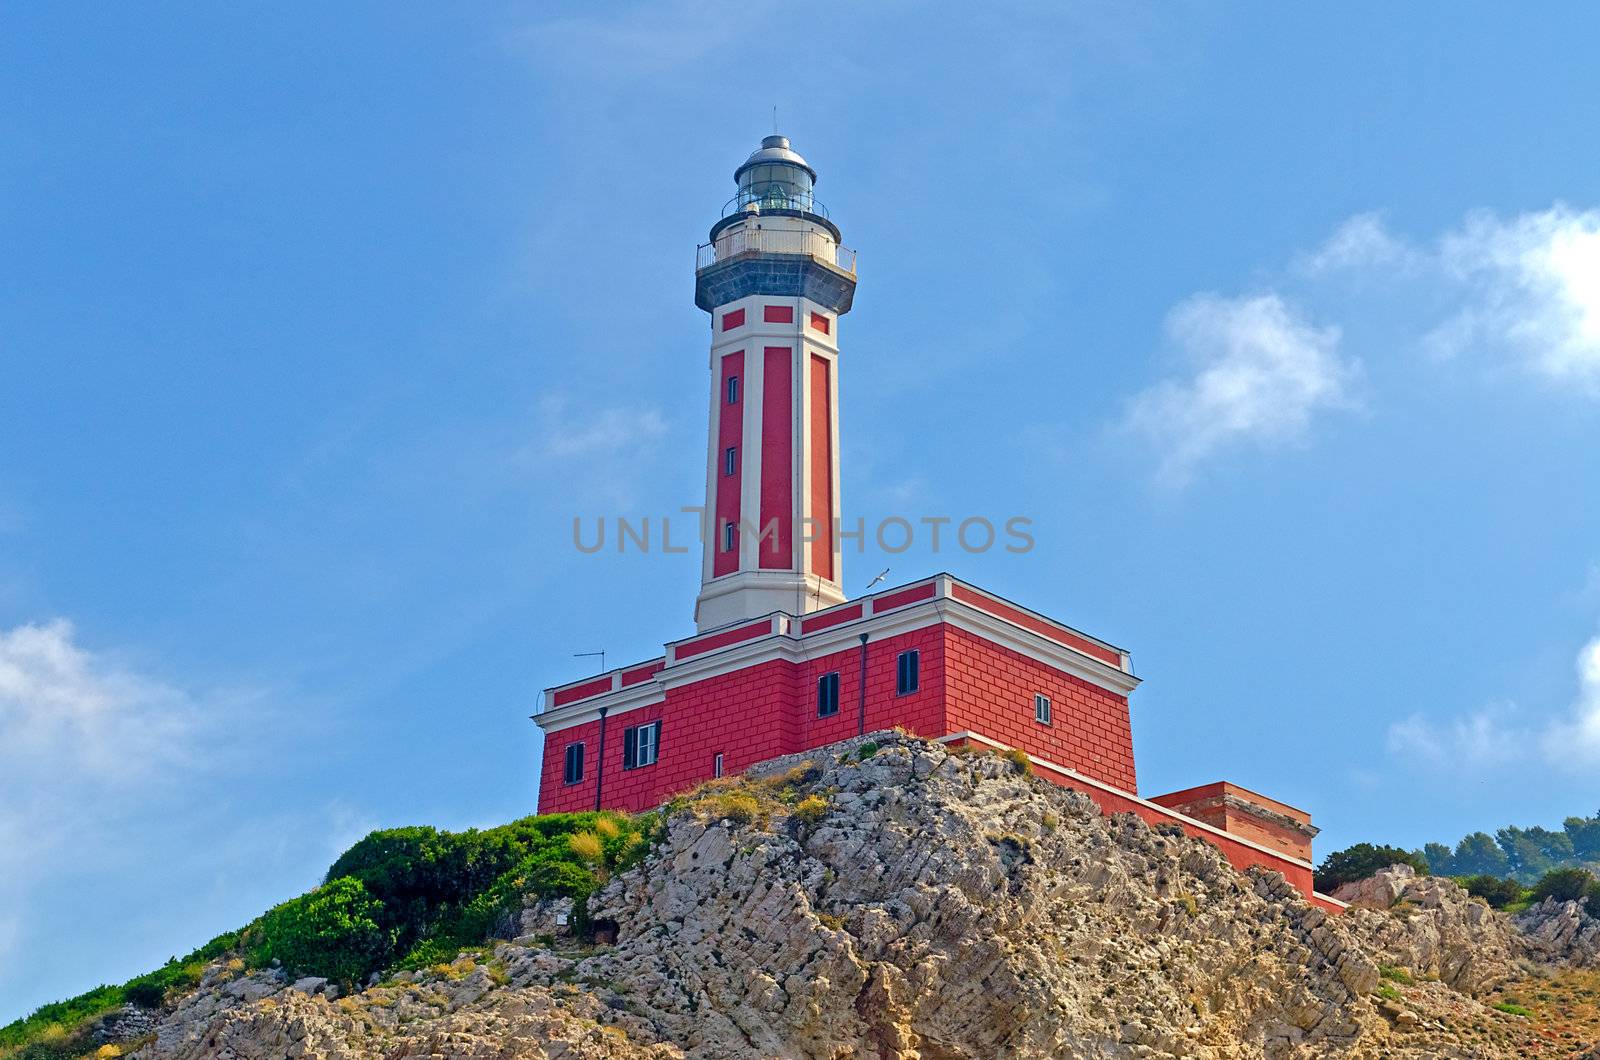 Red Lighthouse seen on the island of Capri, Italy, shot from a boat